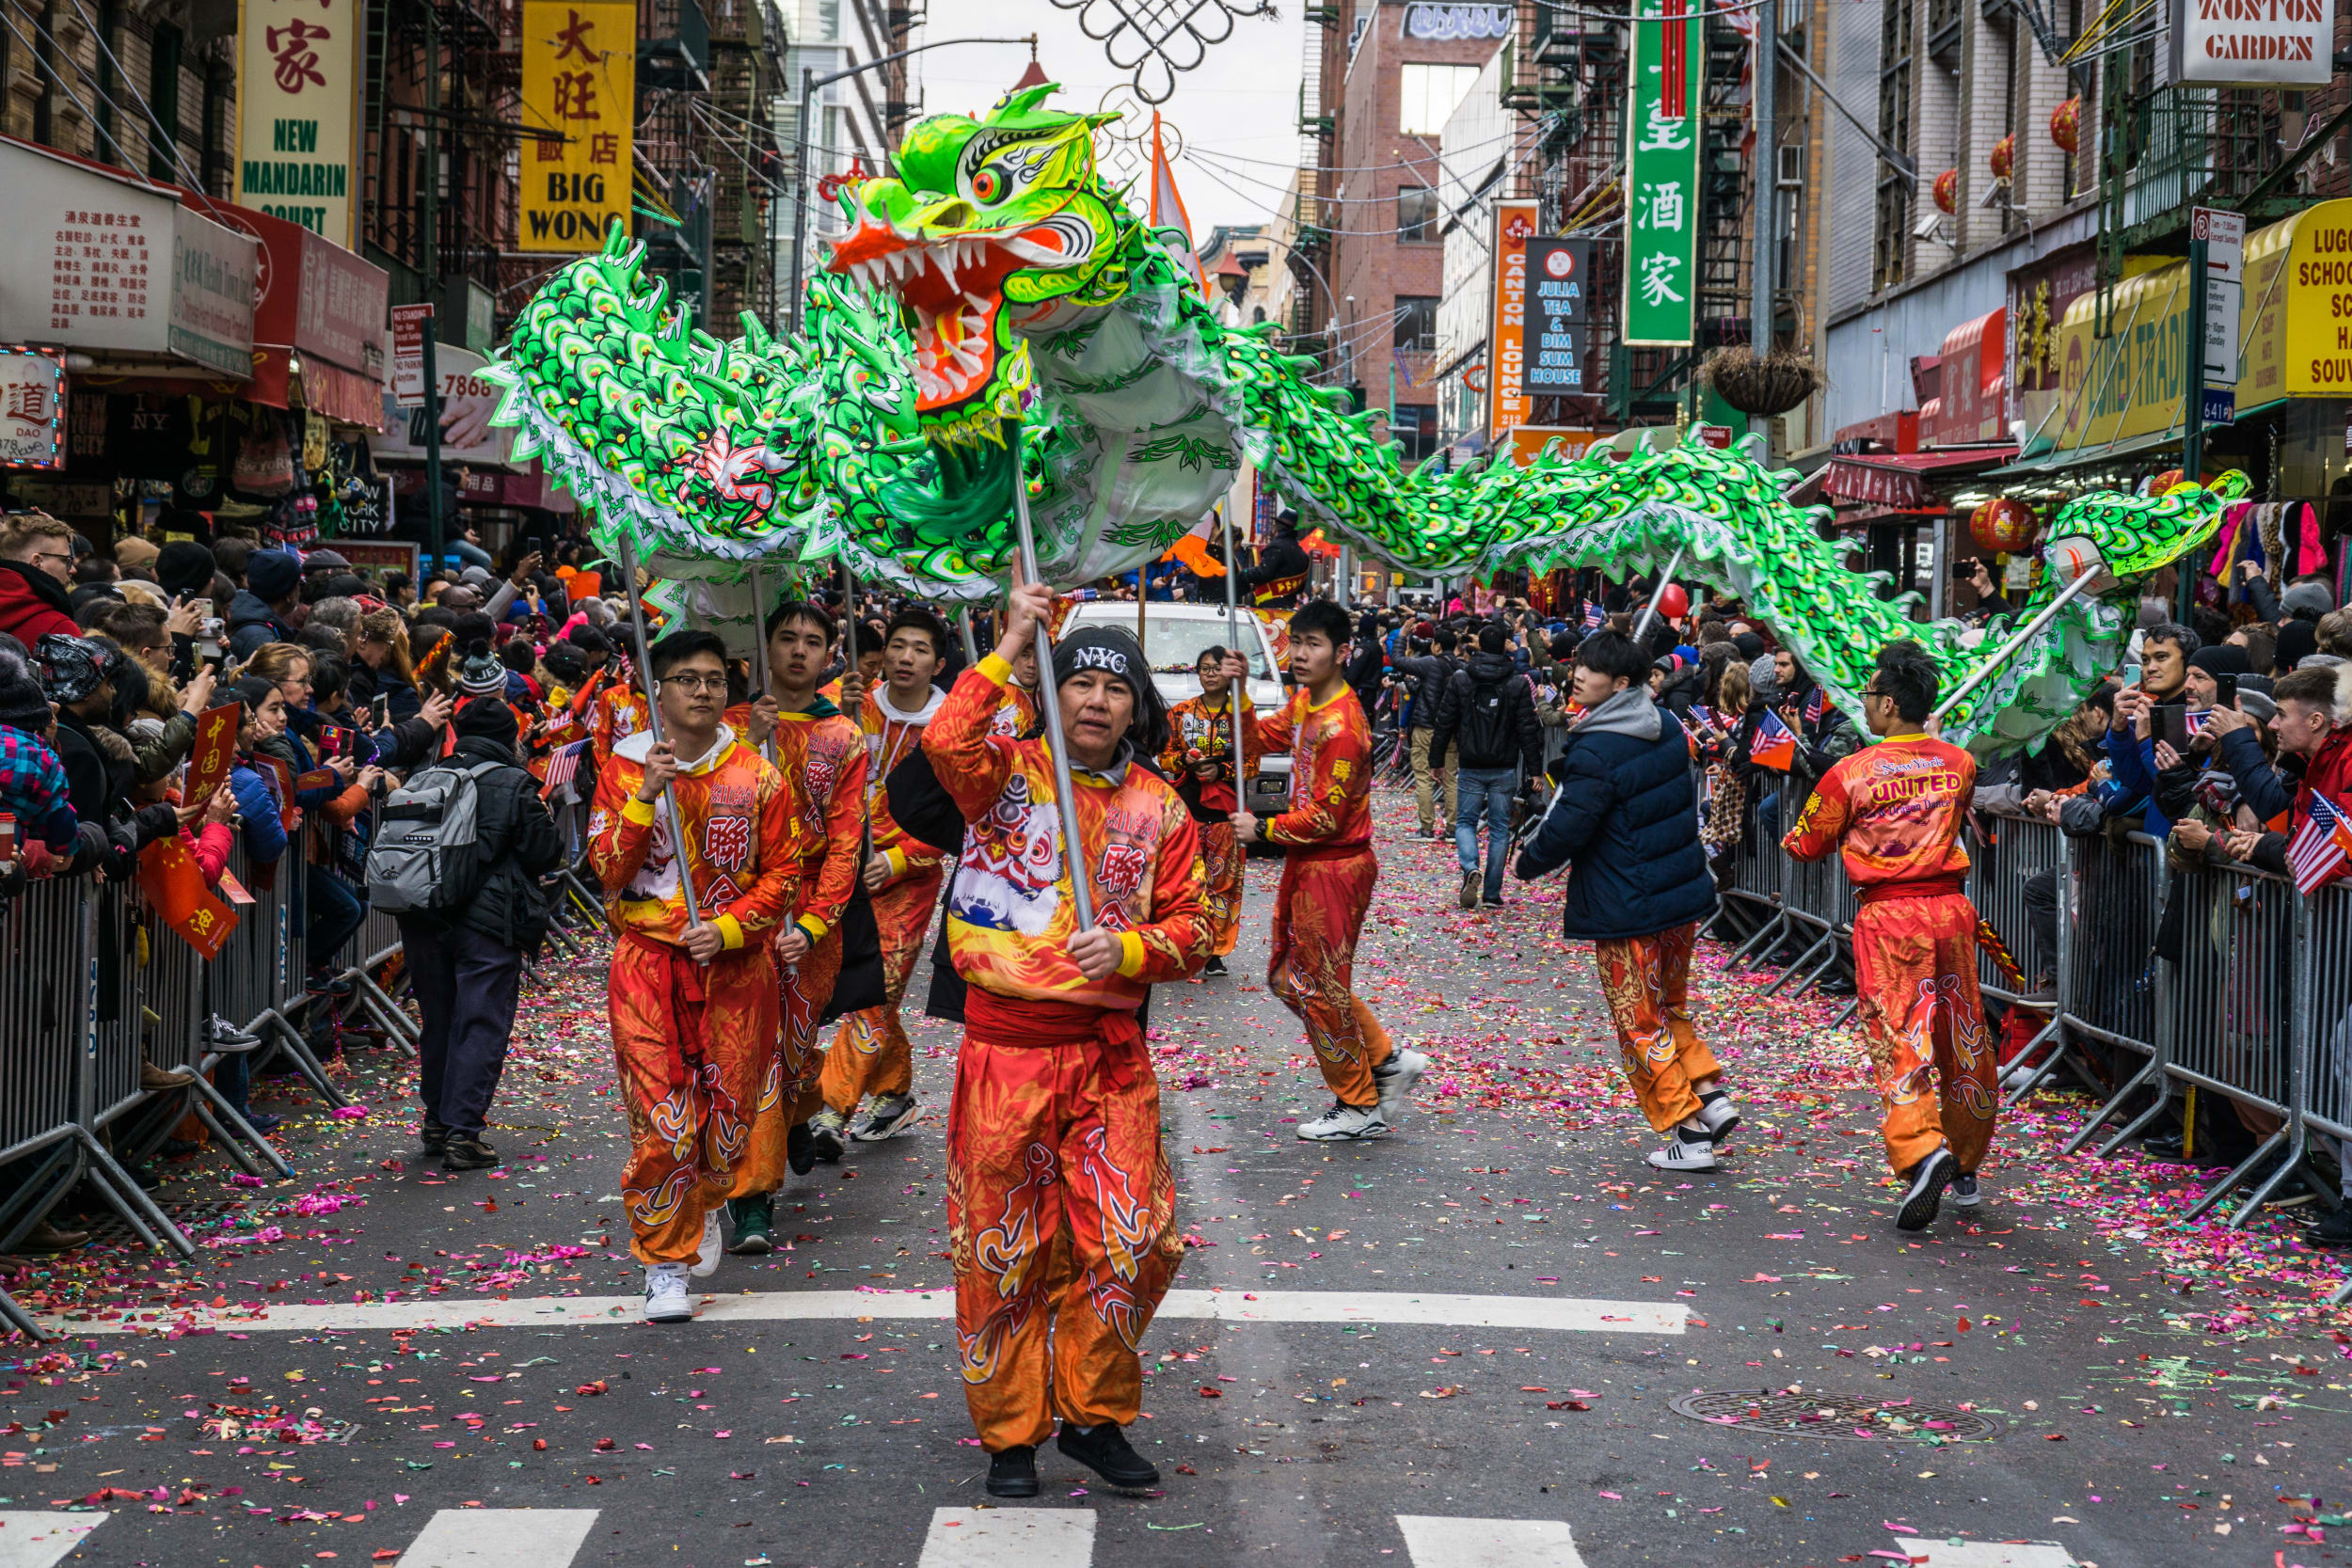 Traditional Chinese dragon dance, with green dragon held above the mens heads, the men are dressed in red clothing and crowds watch from New York China town streets. 